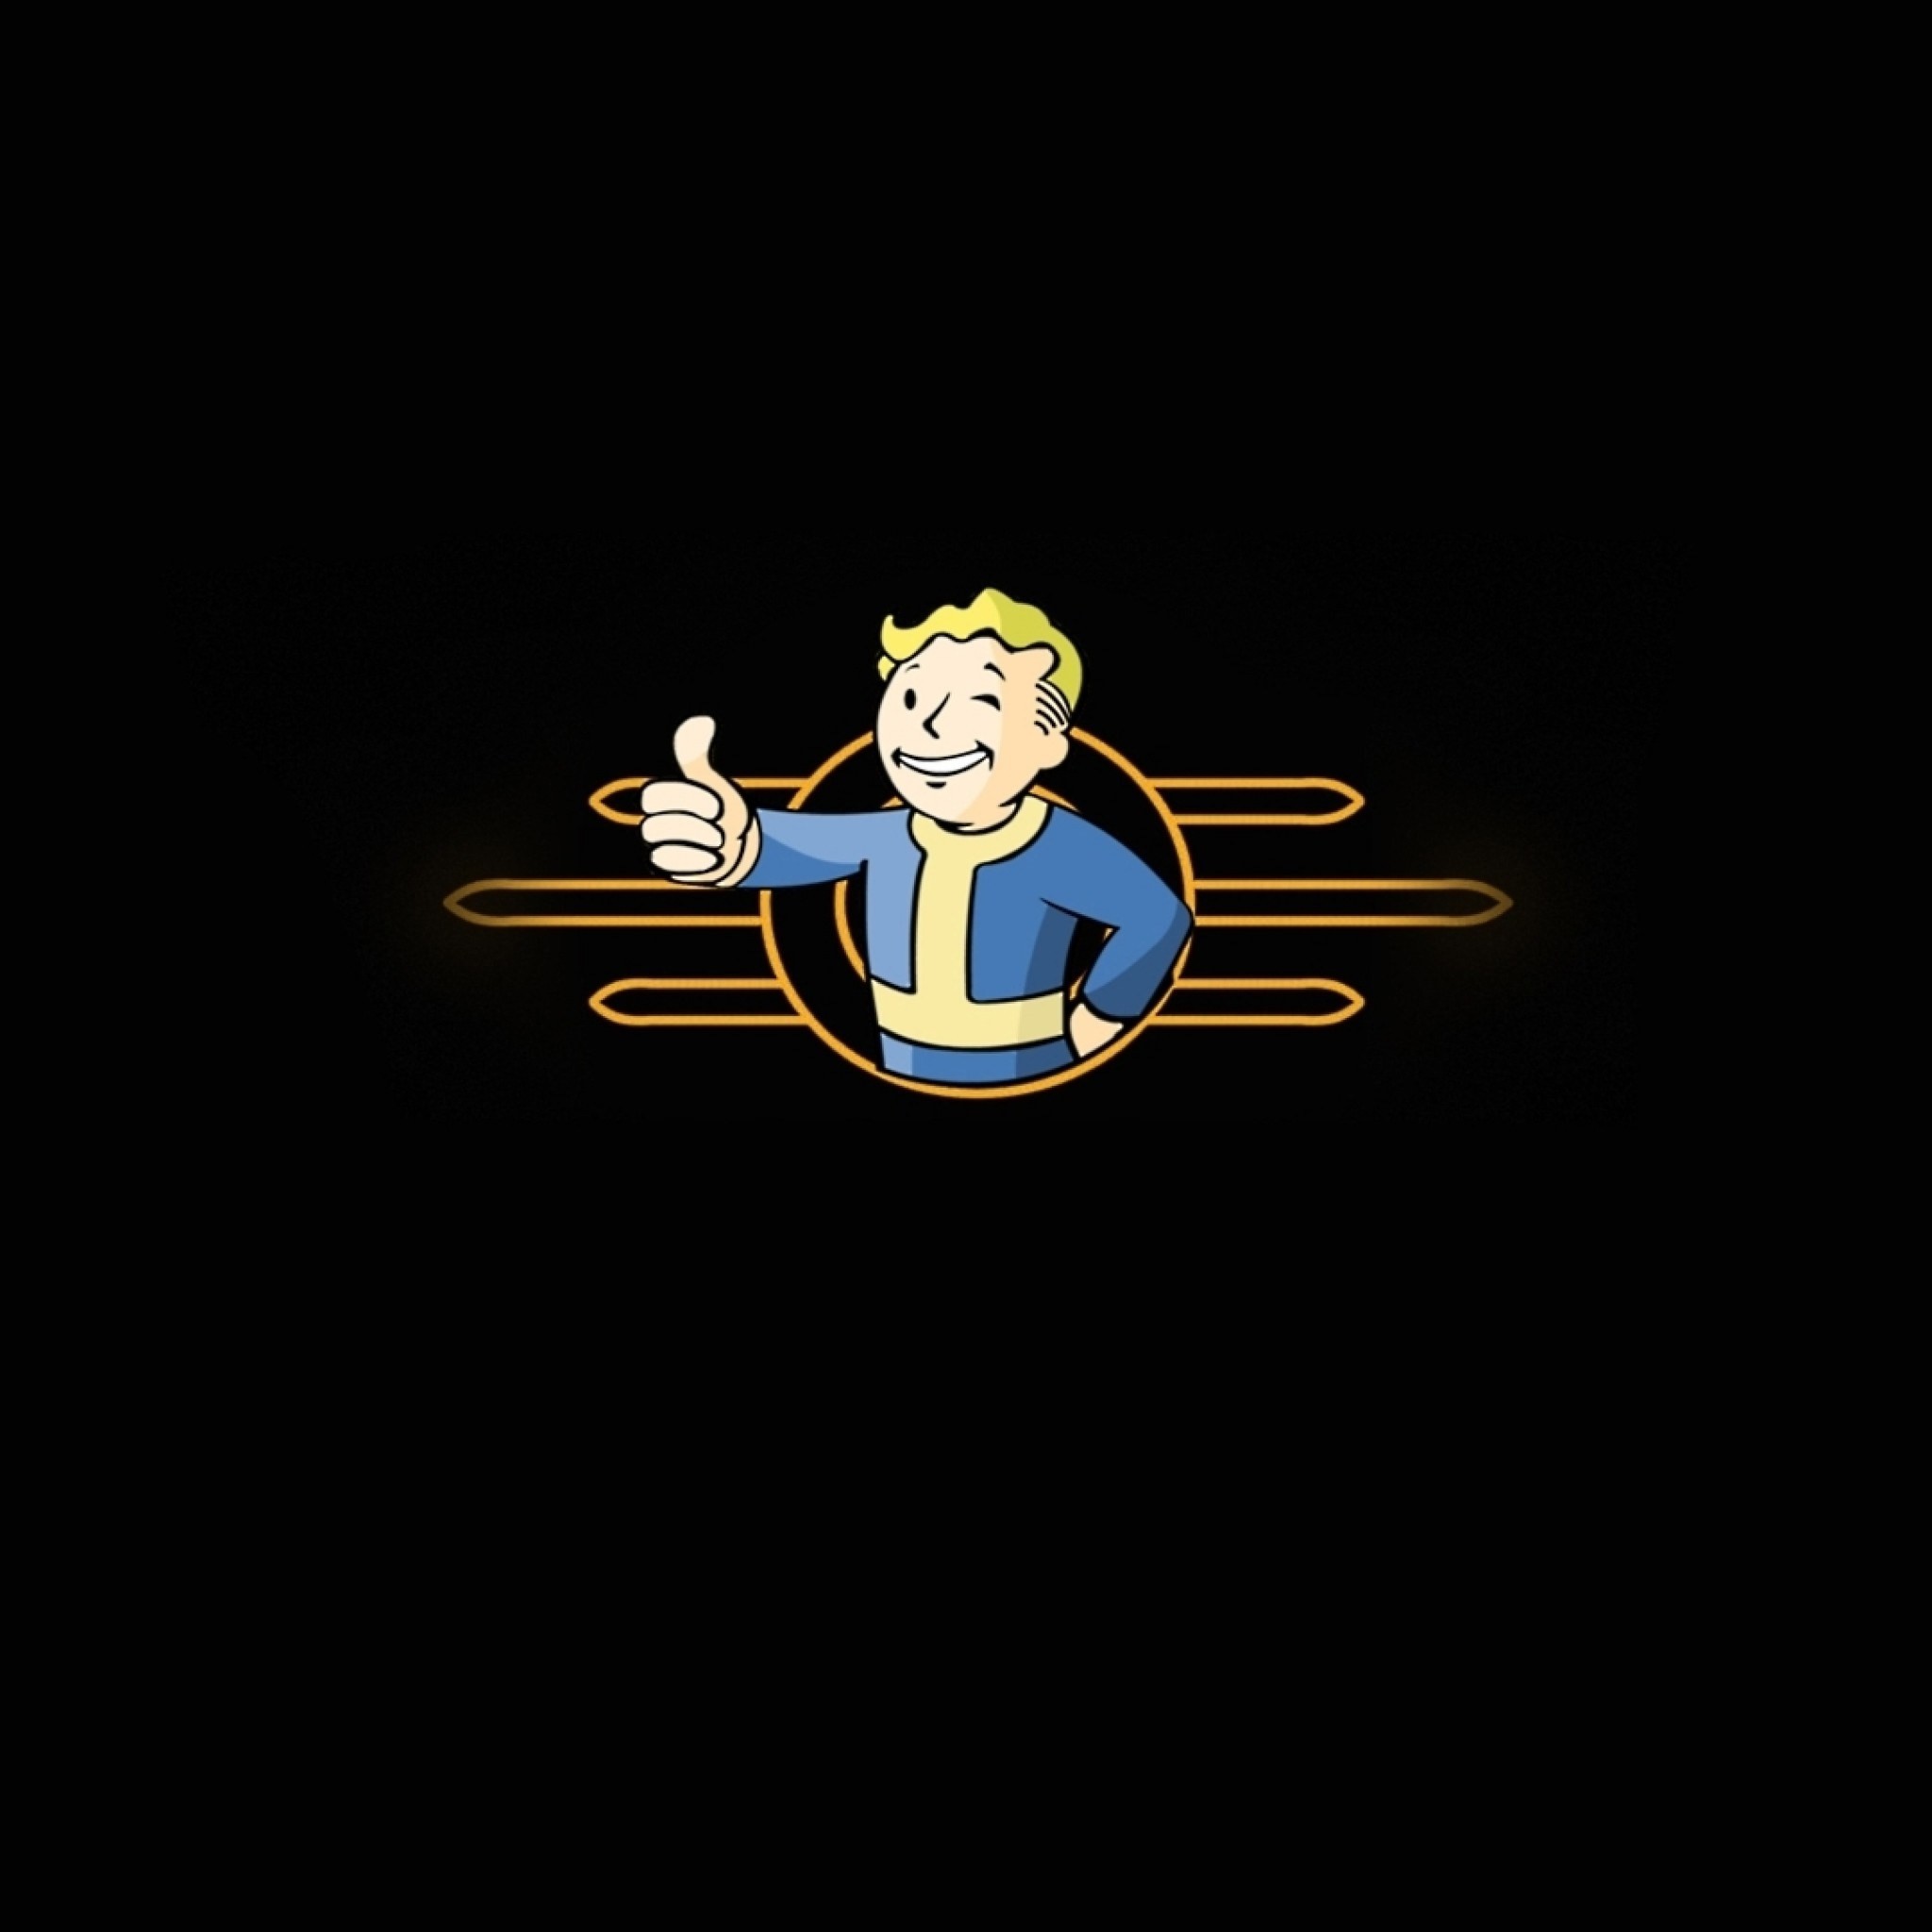 Fallout Pipboy IPhone Wallpaper.